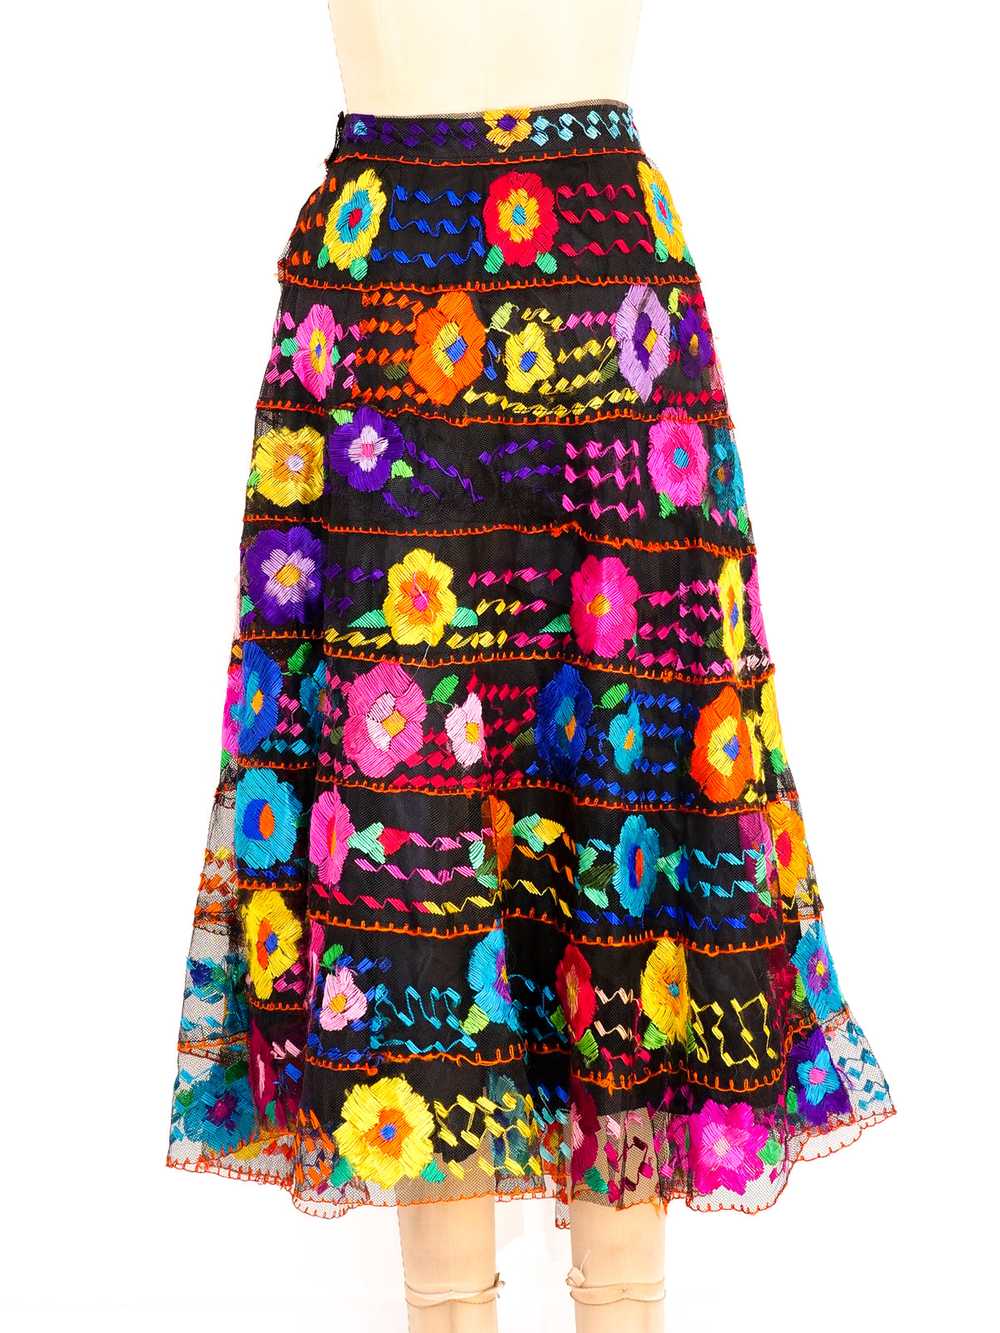 Floral Embroidered Mexican Midi Skirt - image 5